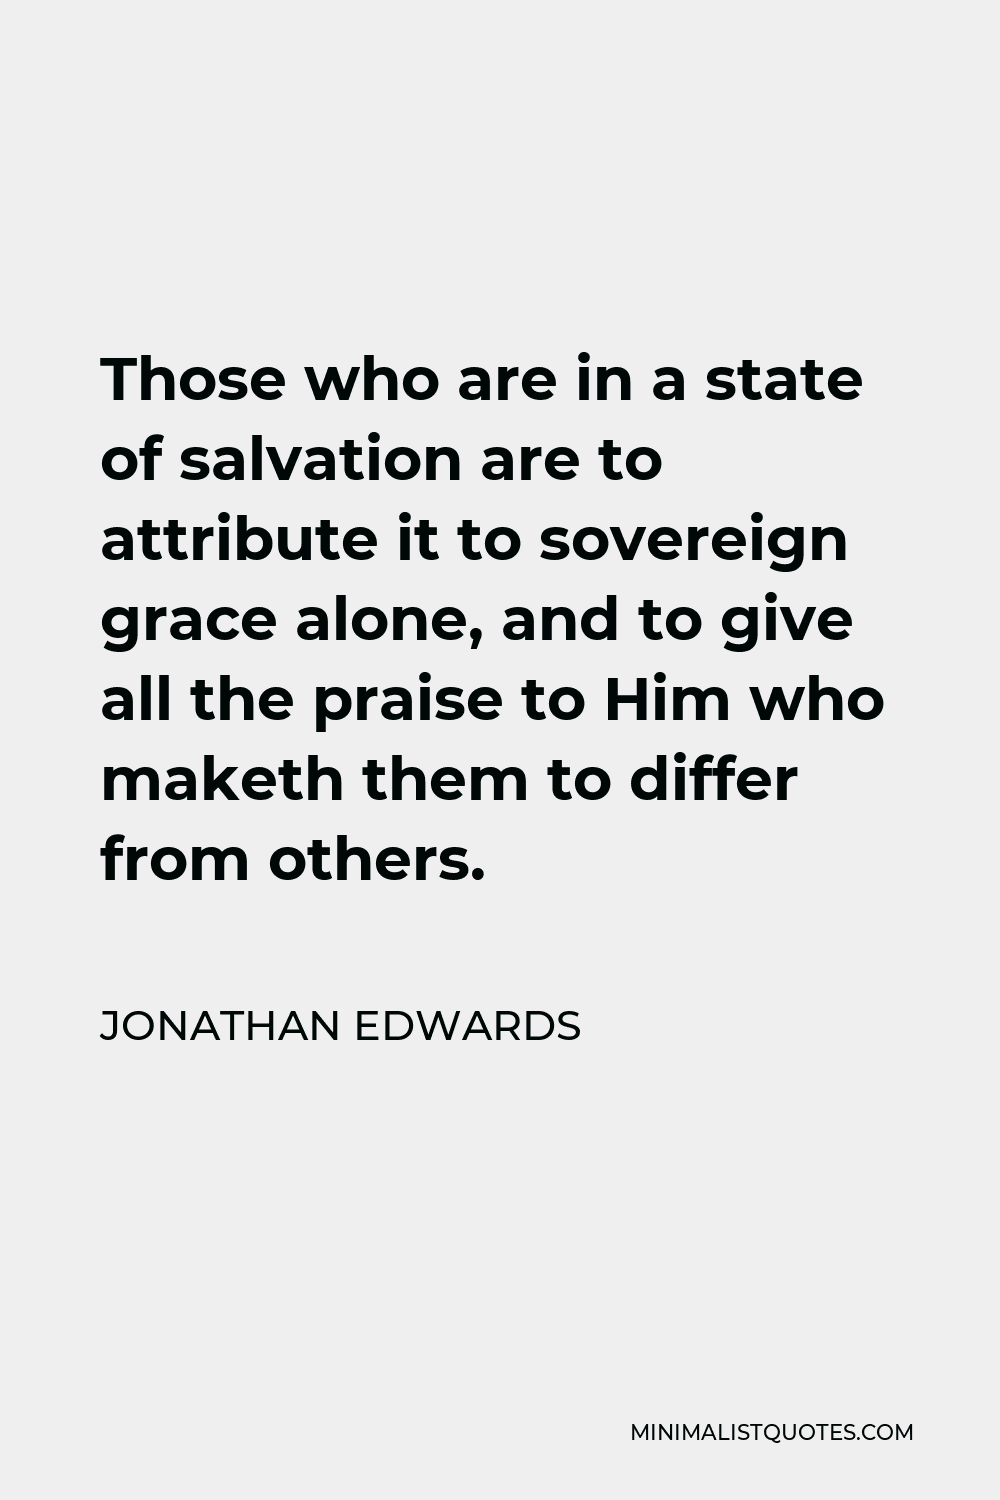 Jonathan Edwards Quote - Those who are in a state of salvation are to attribute it to sovereign grace alone, and to give all the praise to Him who maketh them to differ from others.